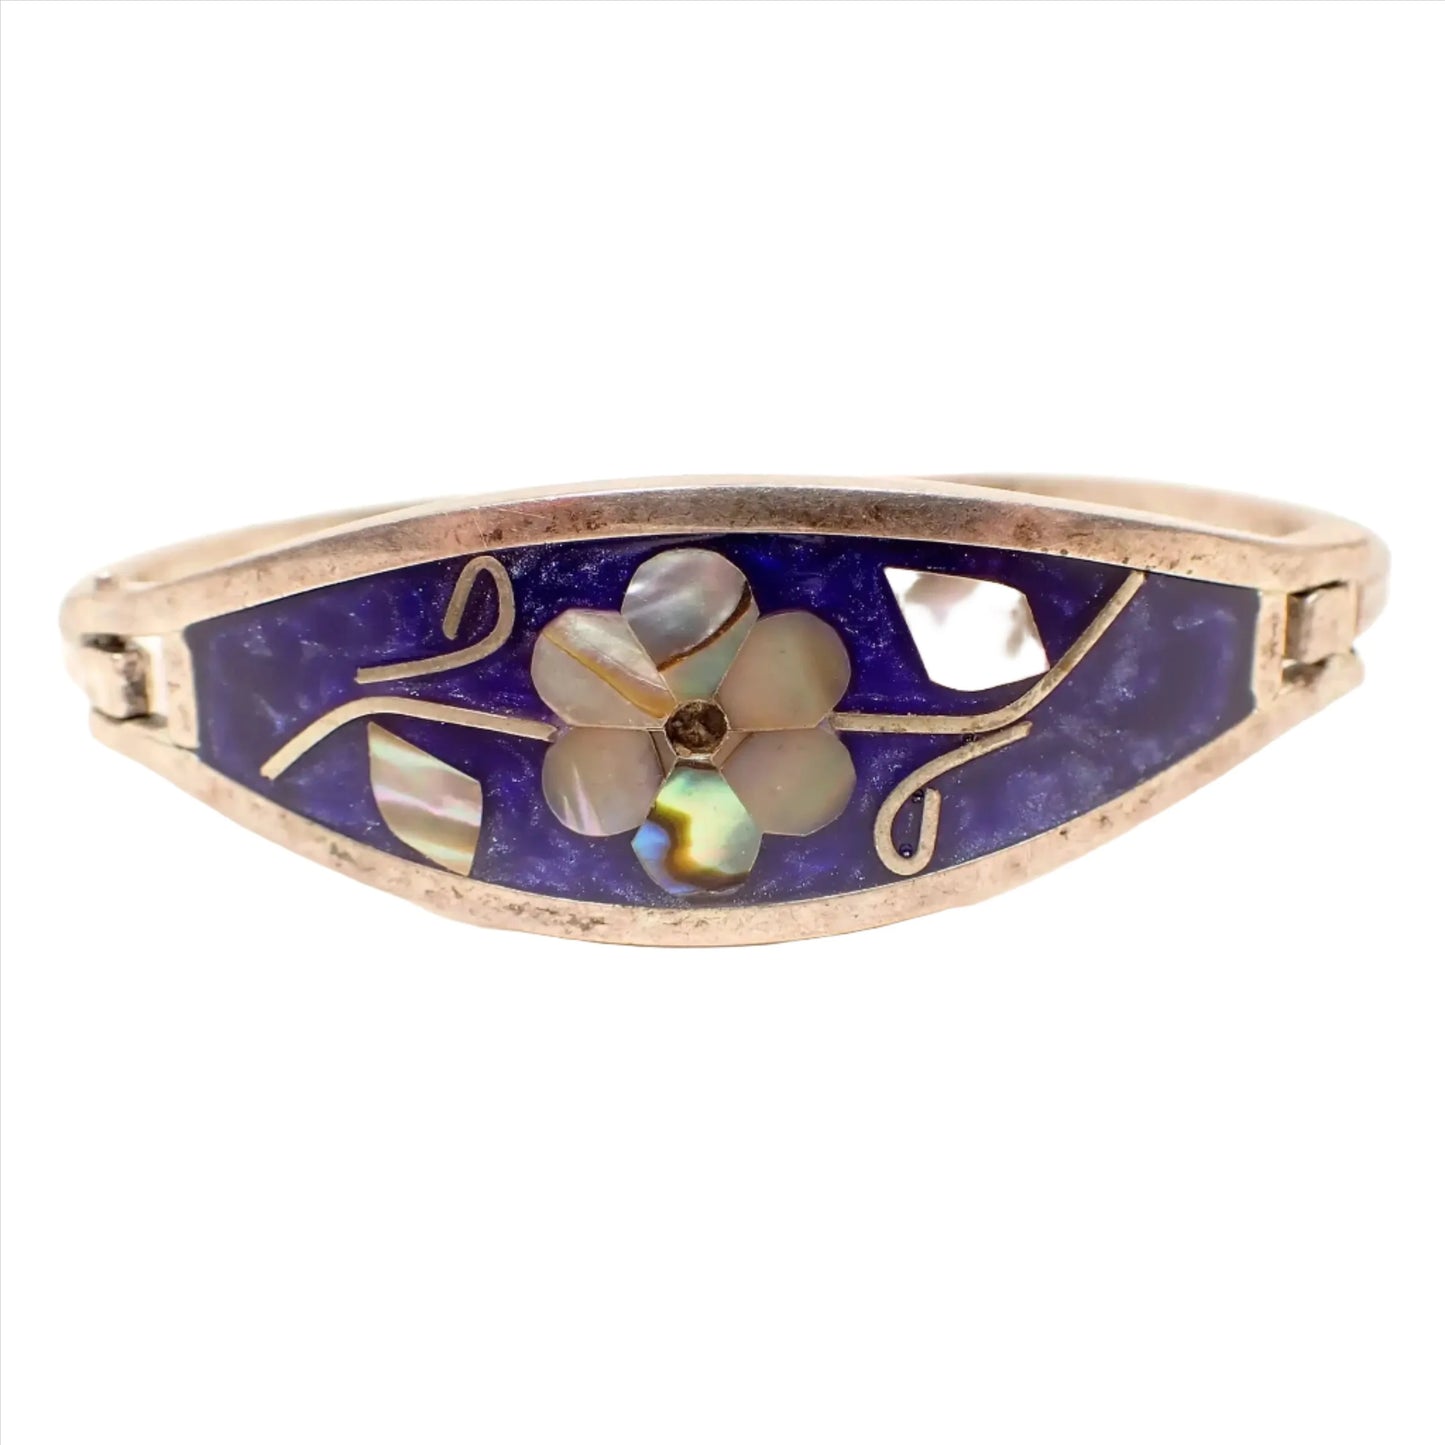 Front view of the retro vintage Mexican floral hinged bangle bracelet. The metal is slightly darkened silver tone in color. There is pearly dark blue resin enamel on the front that is like a purplish blue color. The flower in the middle has petals and leaves of inlaid abalone shell.